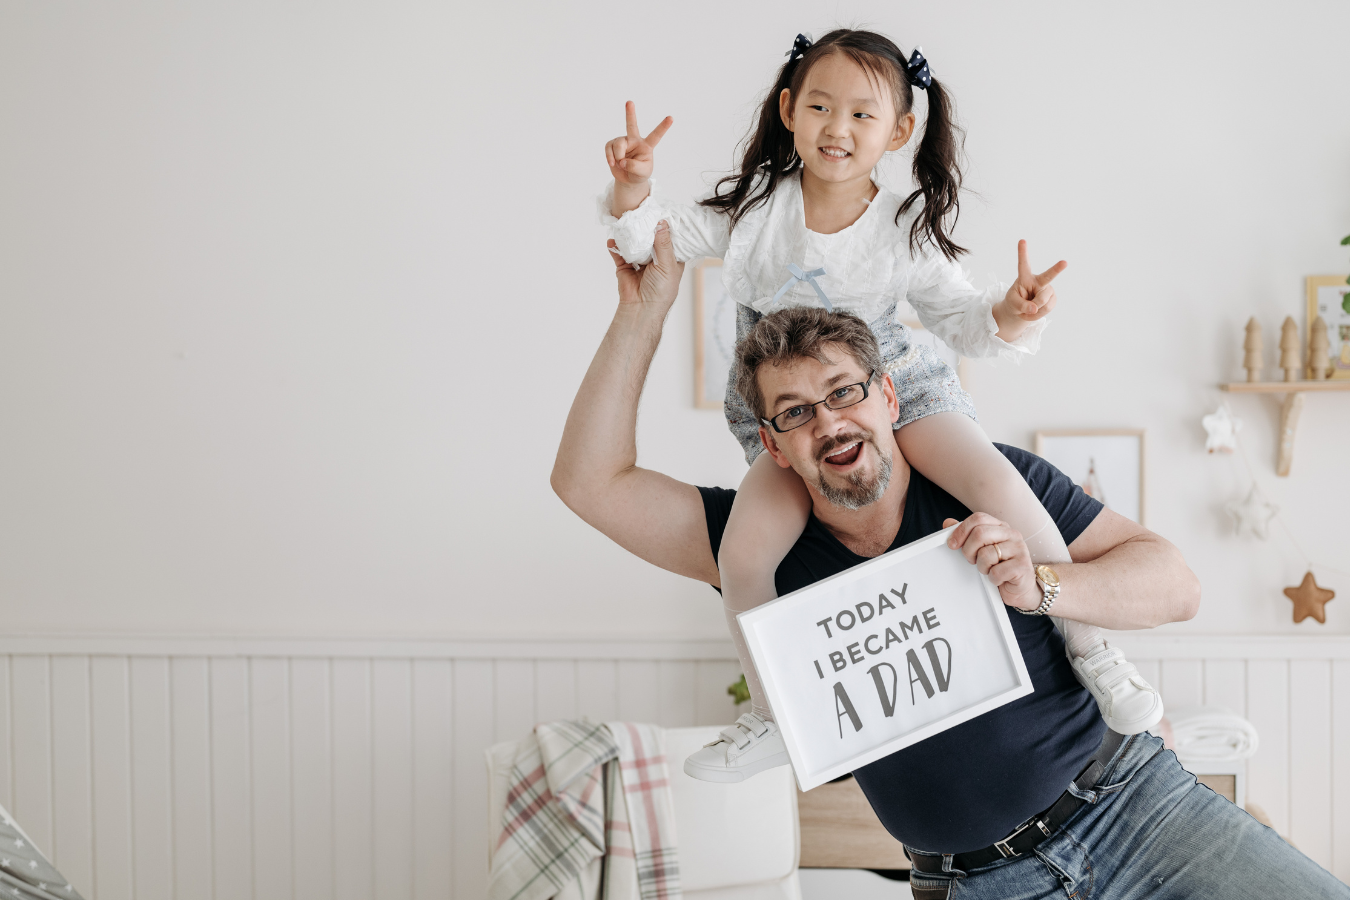 A Father holds a photo that says "Today I Became a Dad" with his young, approximately five year old daughter sitting on his shoulders. Effective data management in Sparkrock 365's ERP can assist family services organizations thrive.